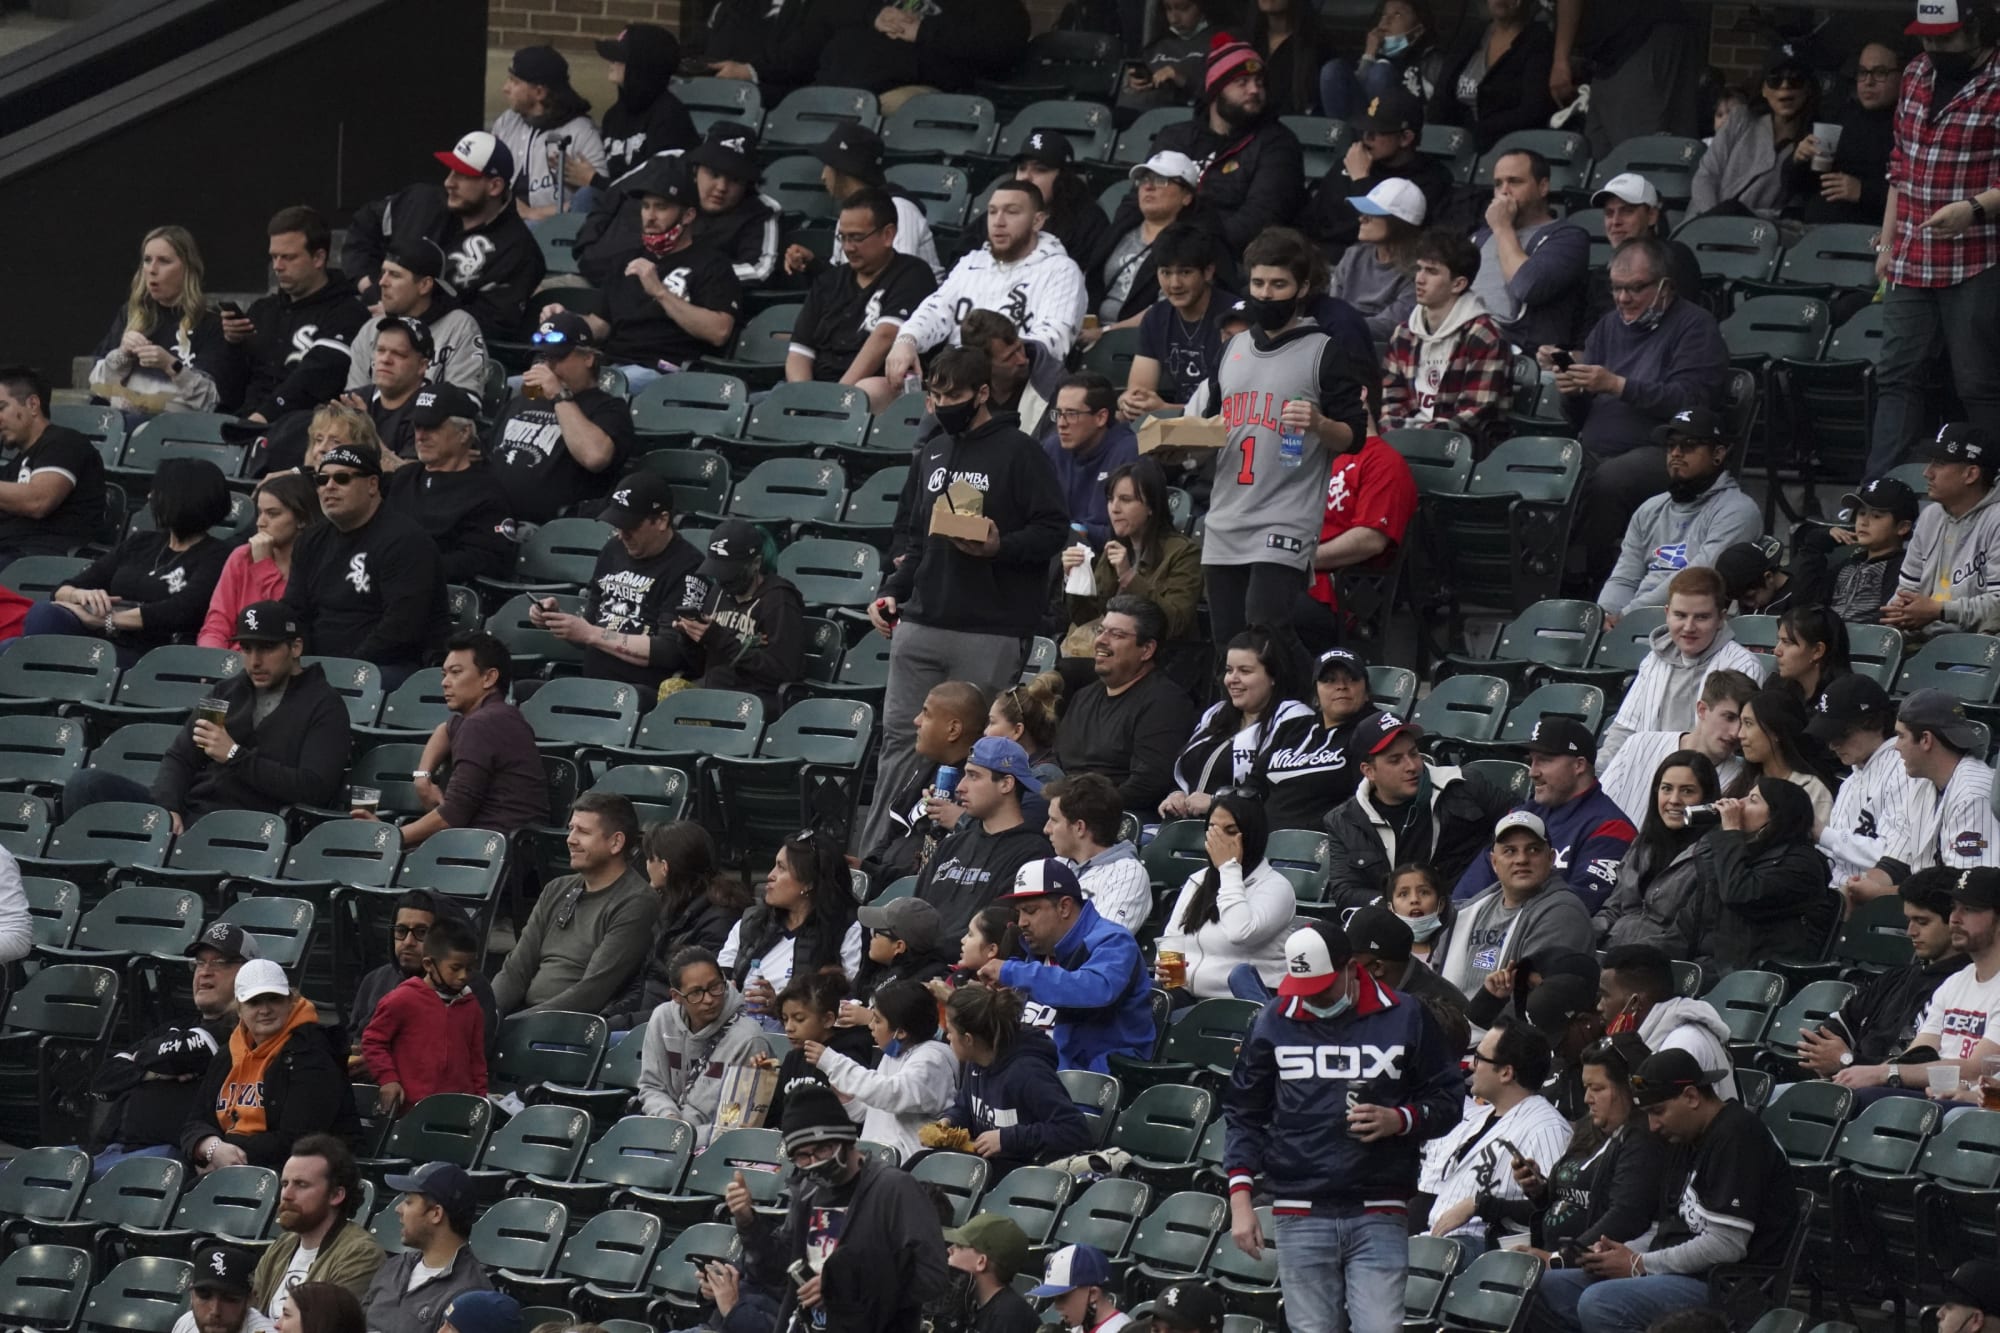 Fans start fullon brawl in stands at White SoxCardinals game (Video)